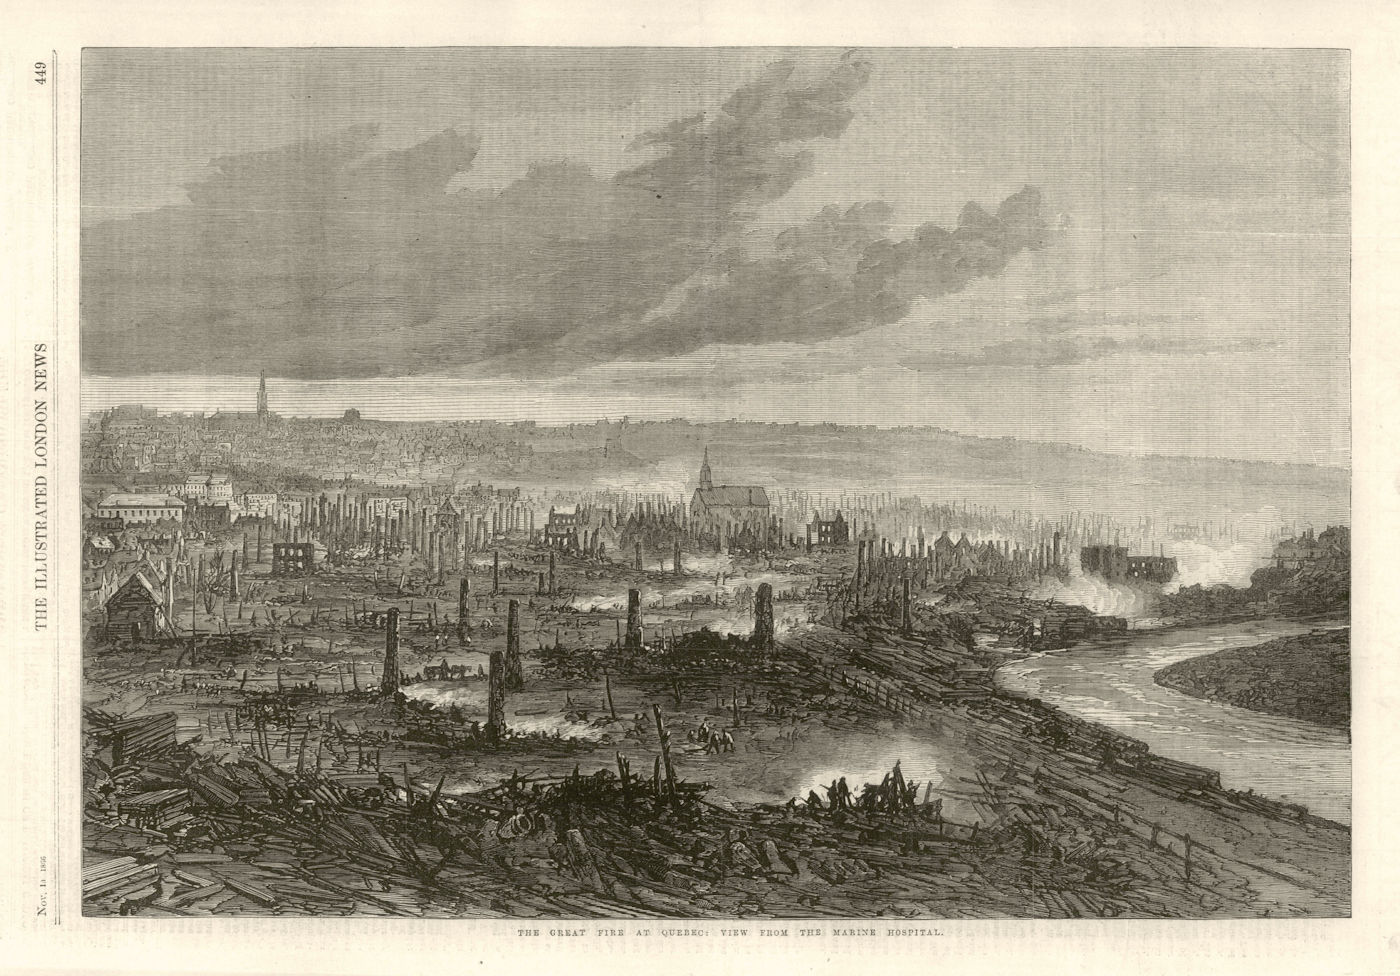 Associate Product The great fire at Quebec: view from the Marine Hospital. Canada 1866 old print